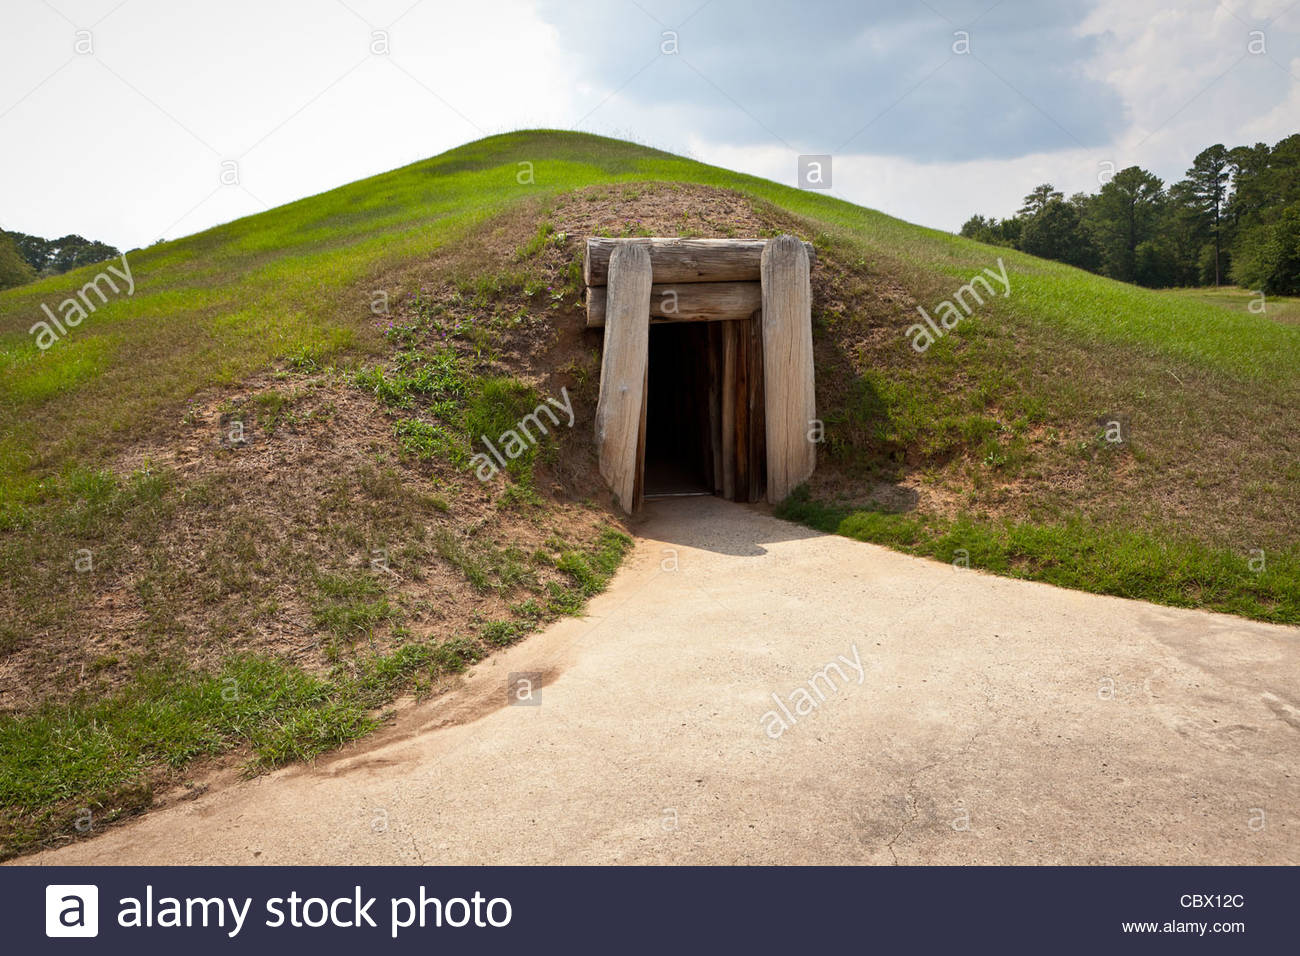 ocmulgee-national-monument-in-macon-ga-the-site-of-native-american-CBX12C